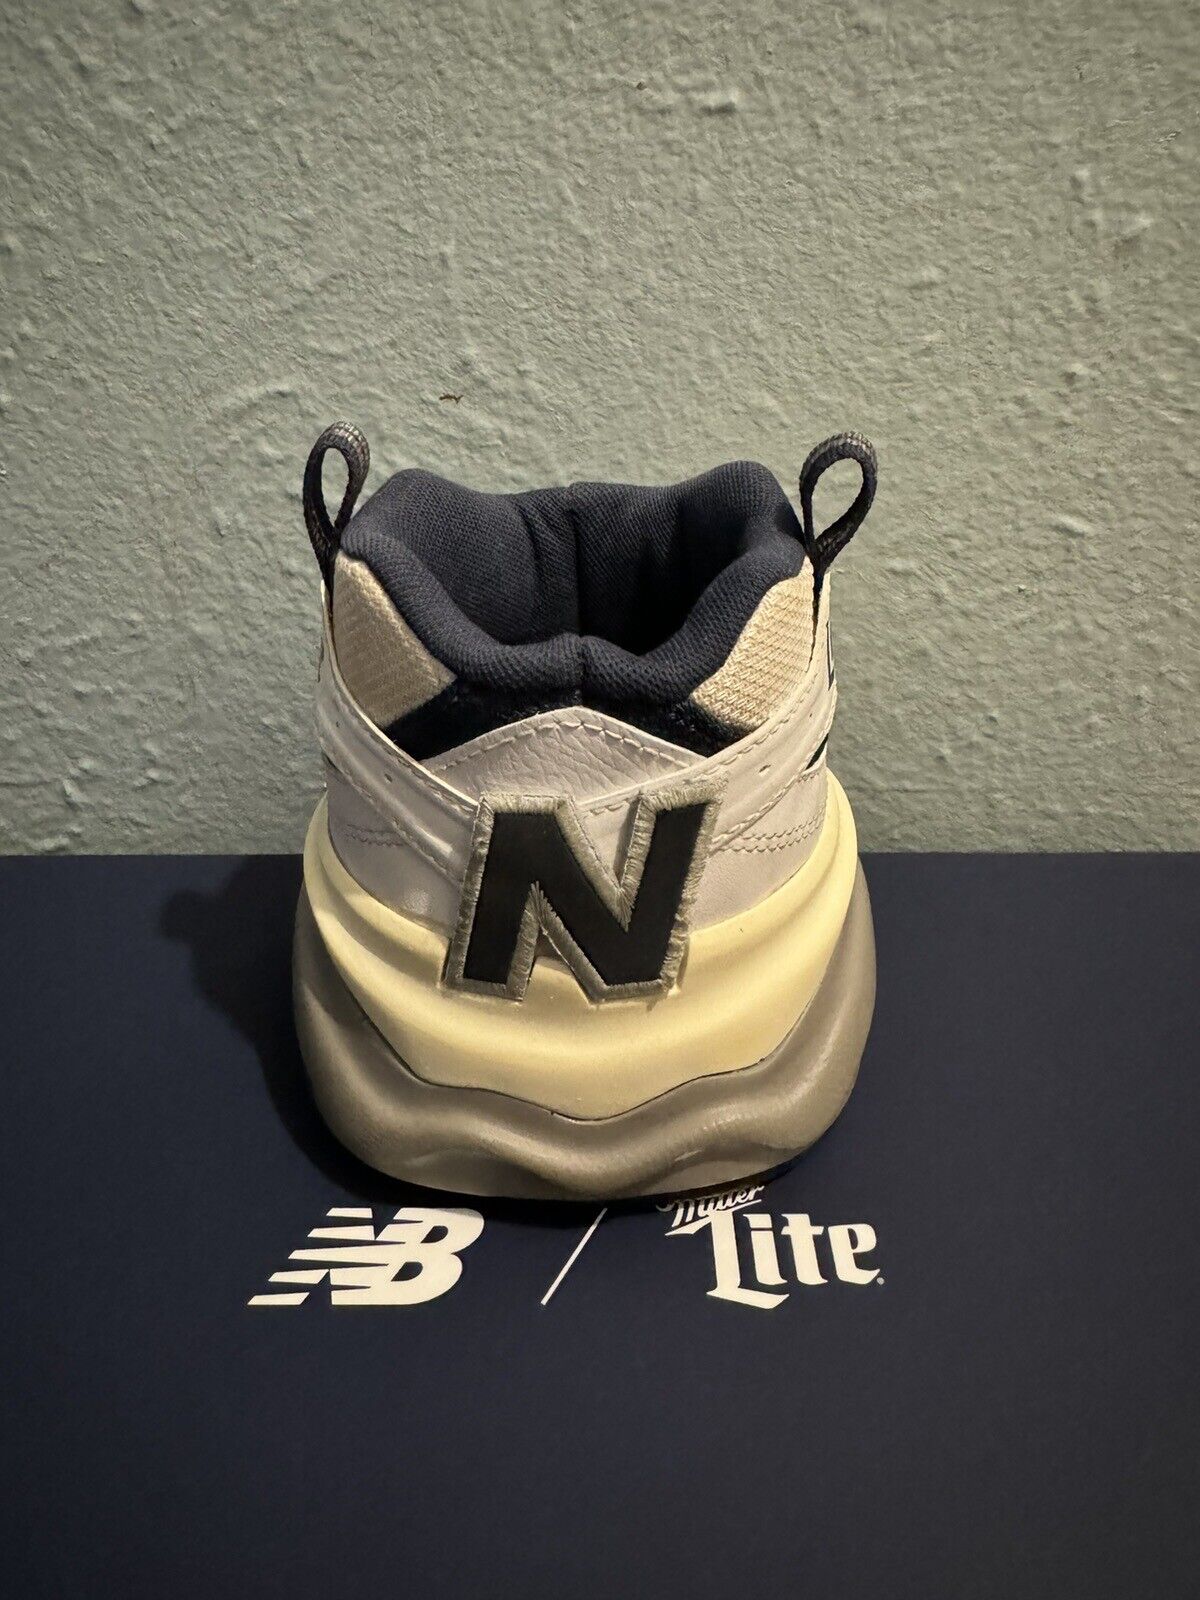 New Balance x Miller Lite Shoezie - Limited 1/50 Father's Day Release